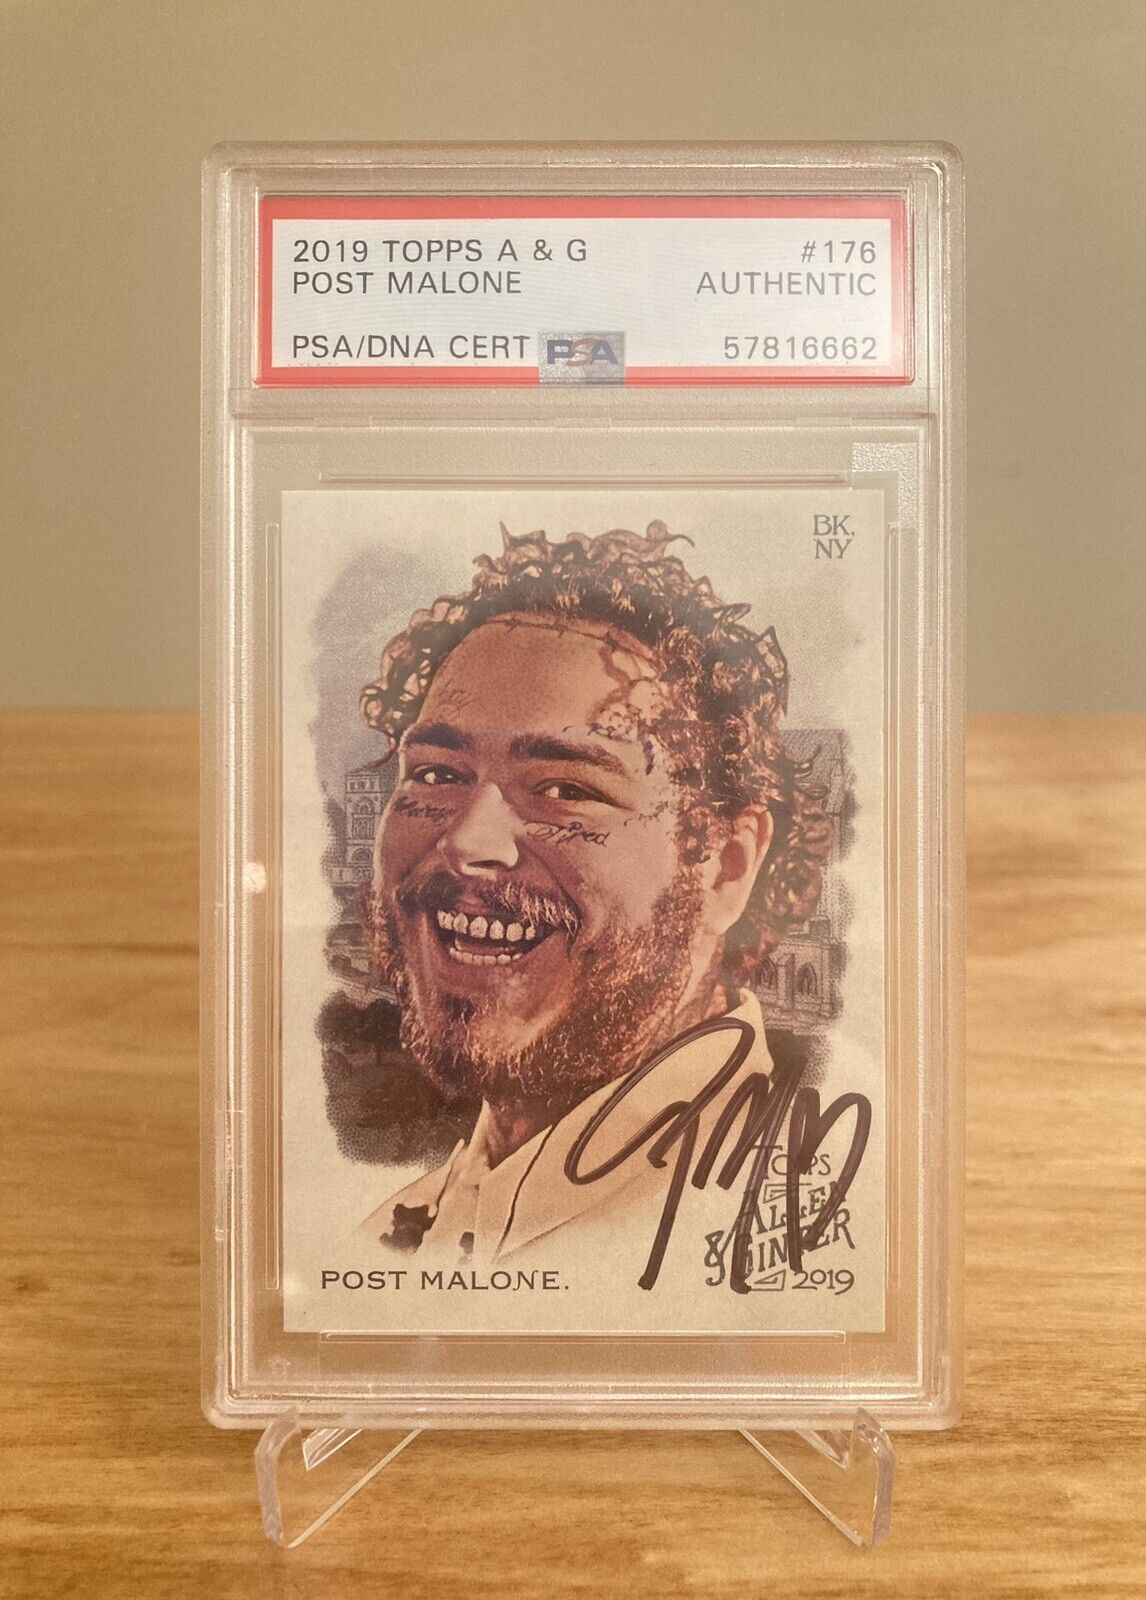 2019 Topps Allen & Ginter Post Malone PSA Authentic Autograph Card